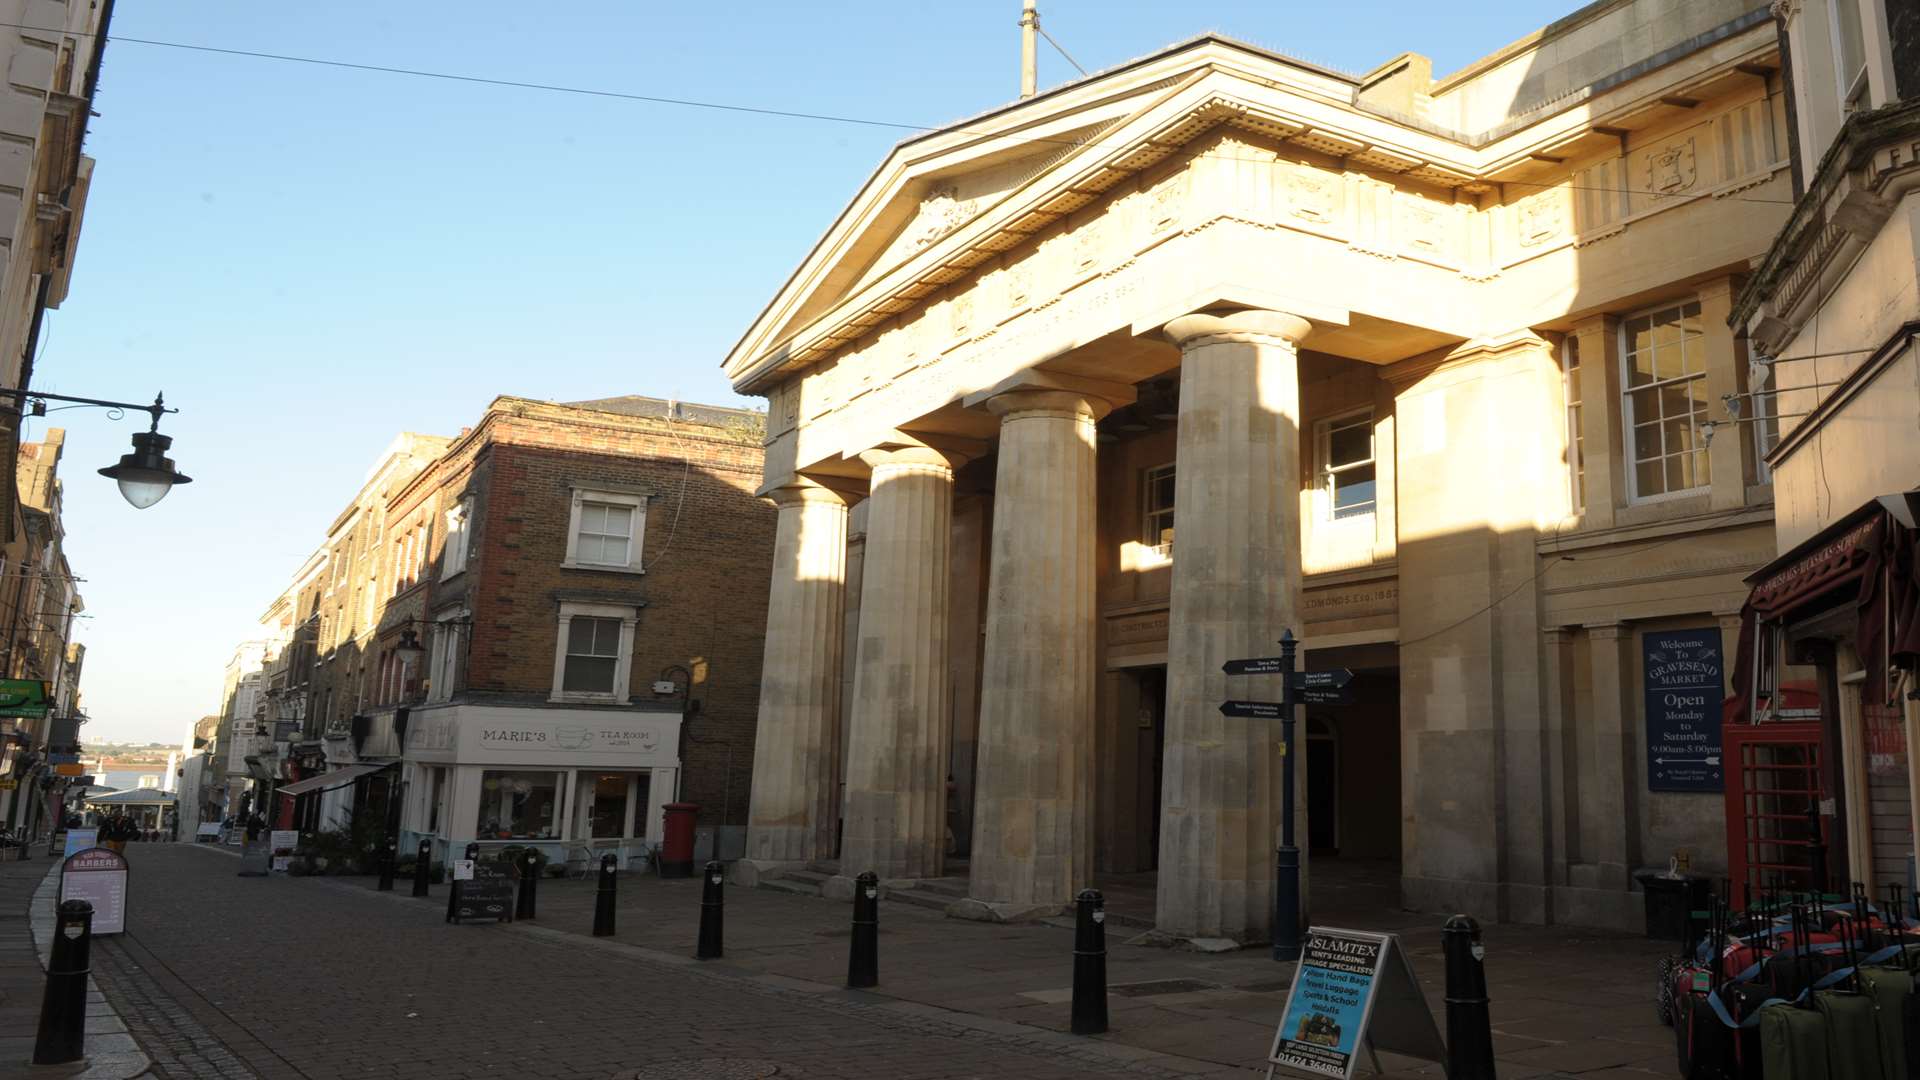 Gravesend Old Town Hall, High Street.